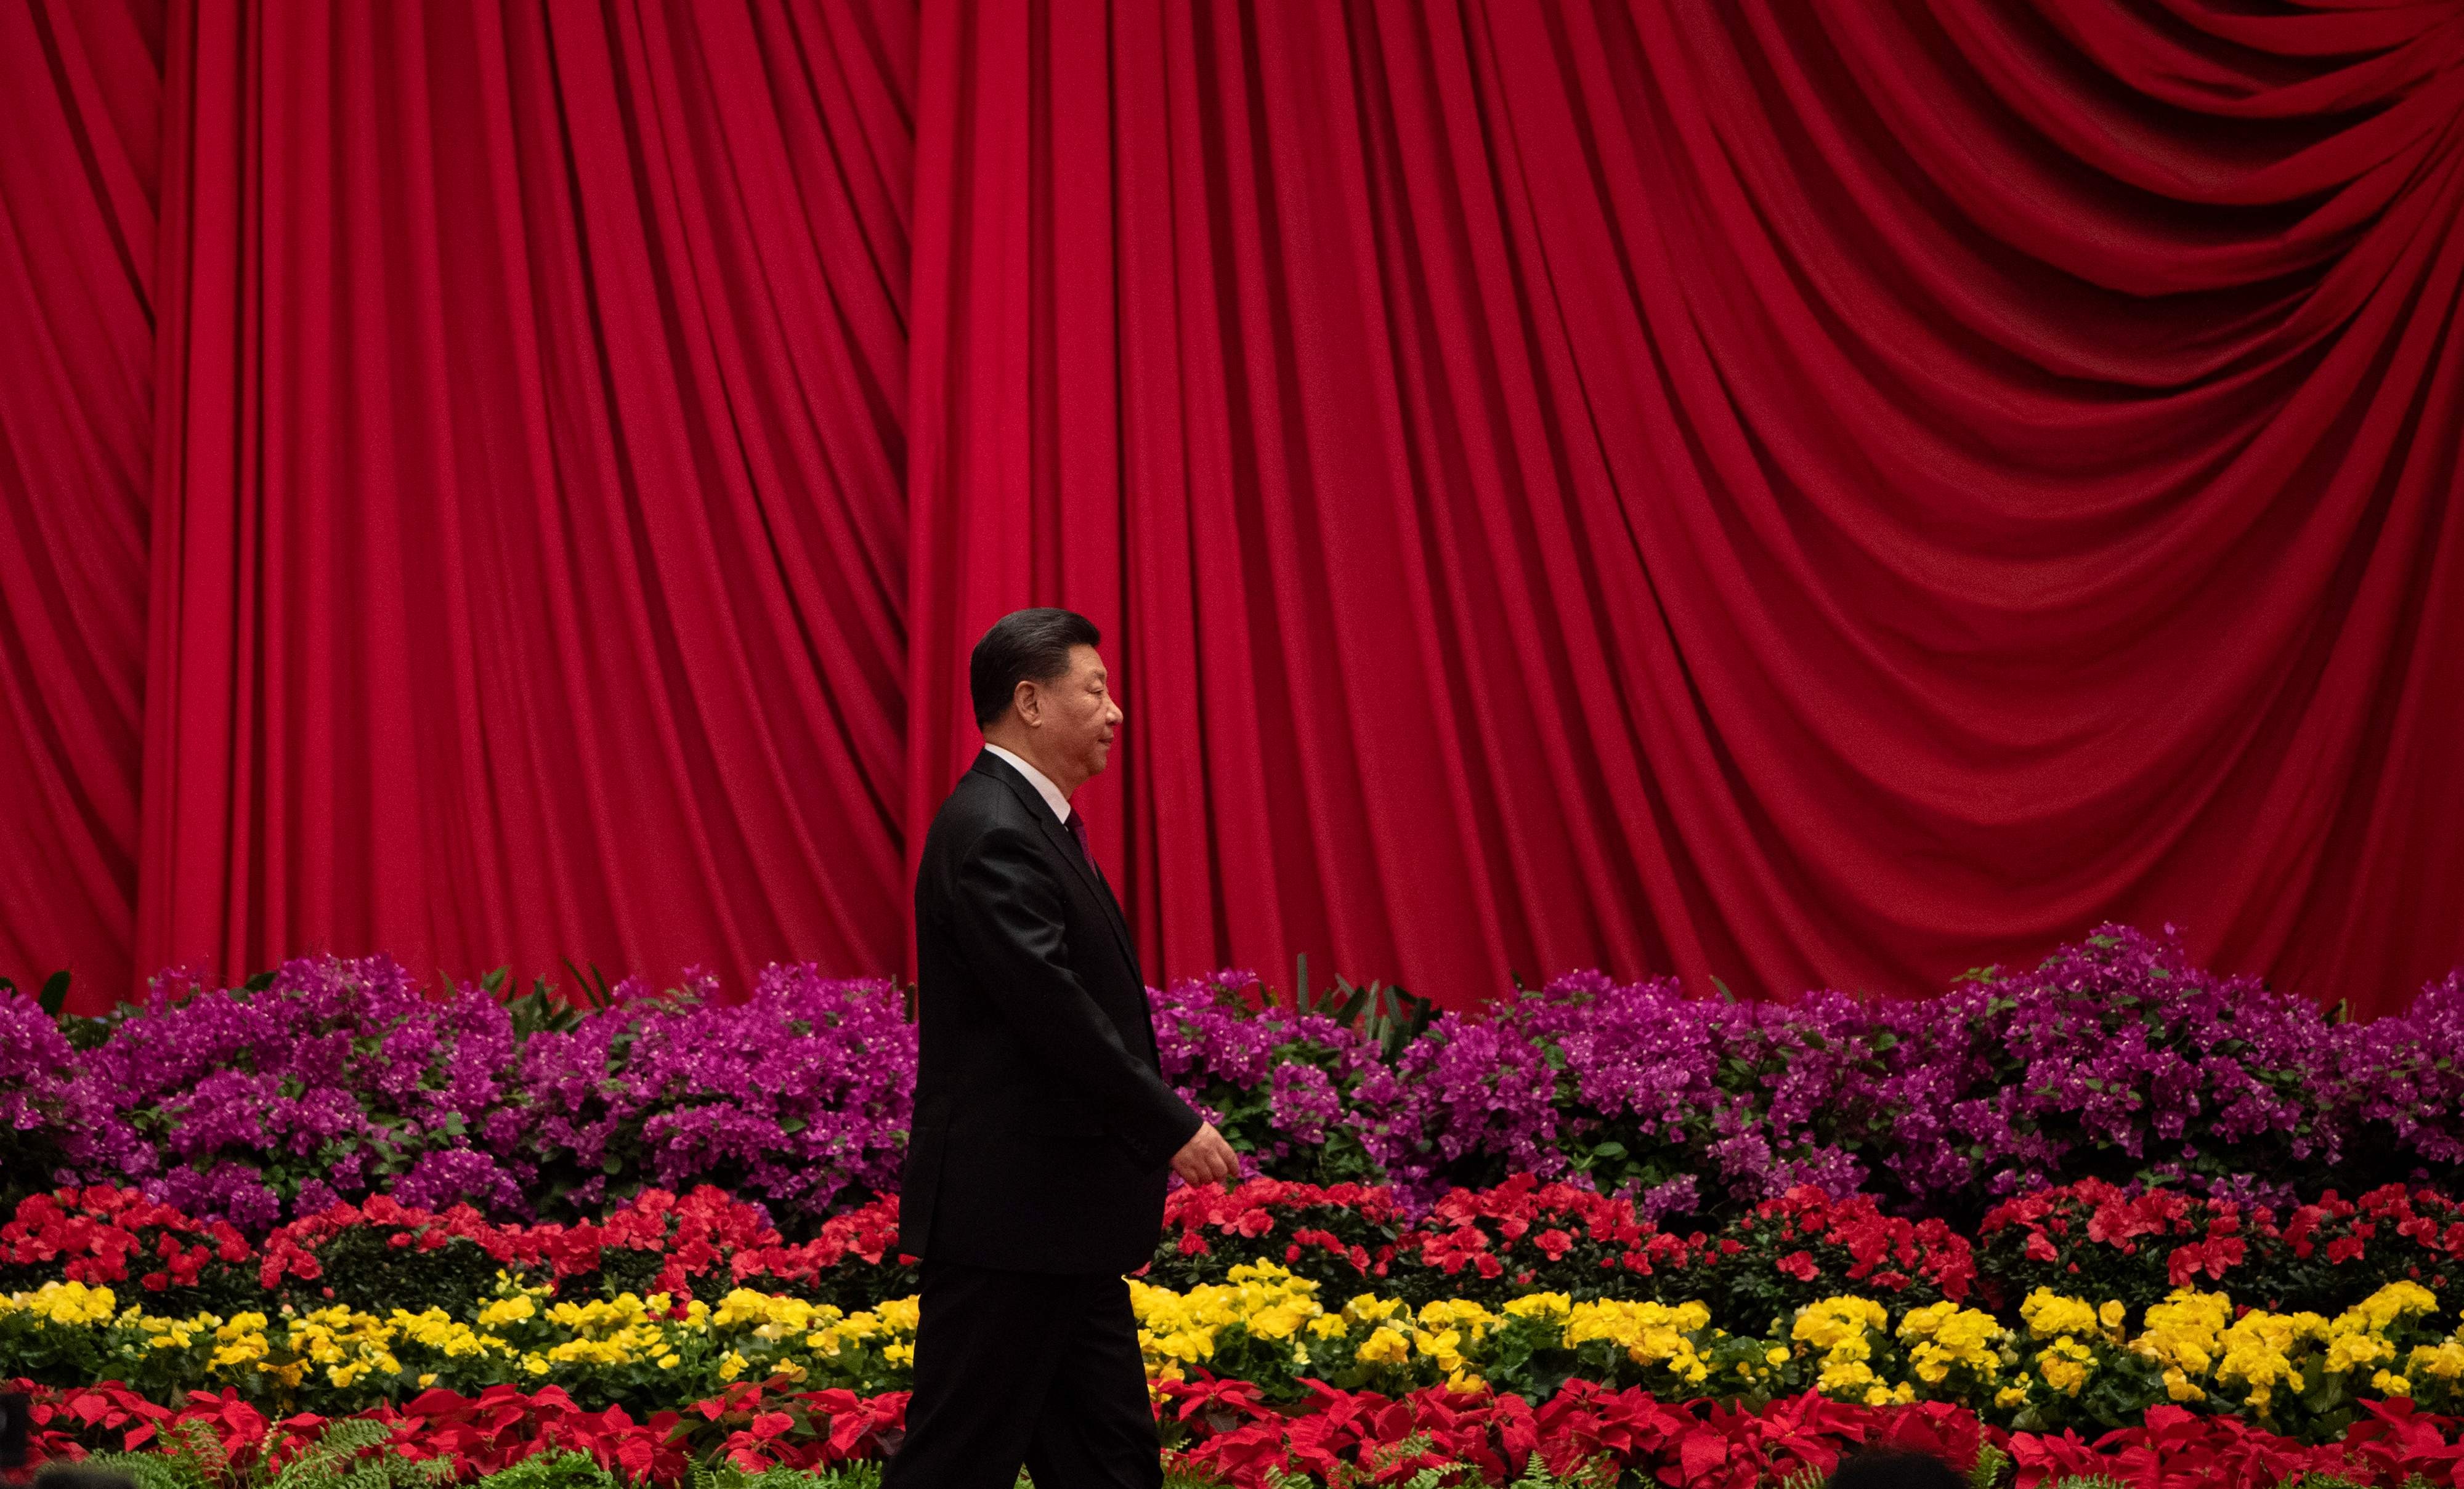 President Xi Jinping at the Great Hall of the People in Beijing on September 30, 2019. Photo: AFP